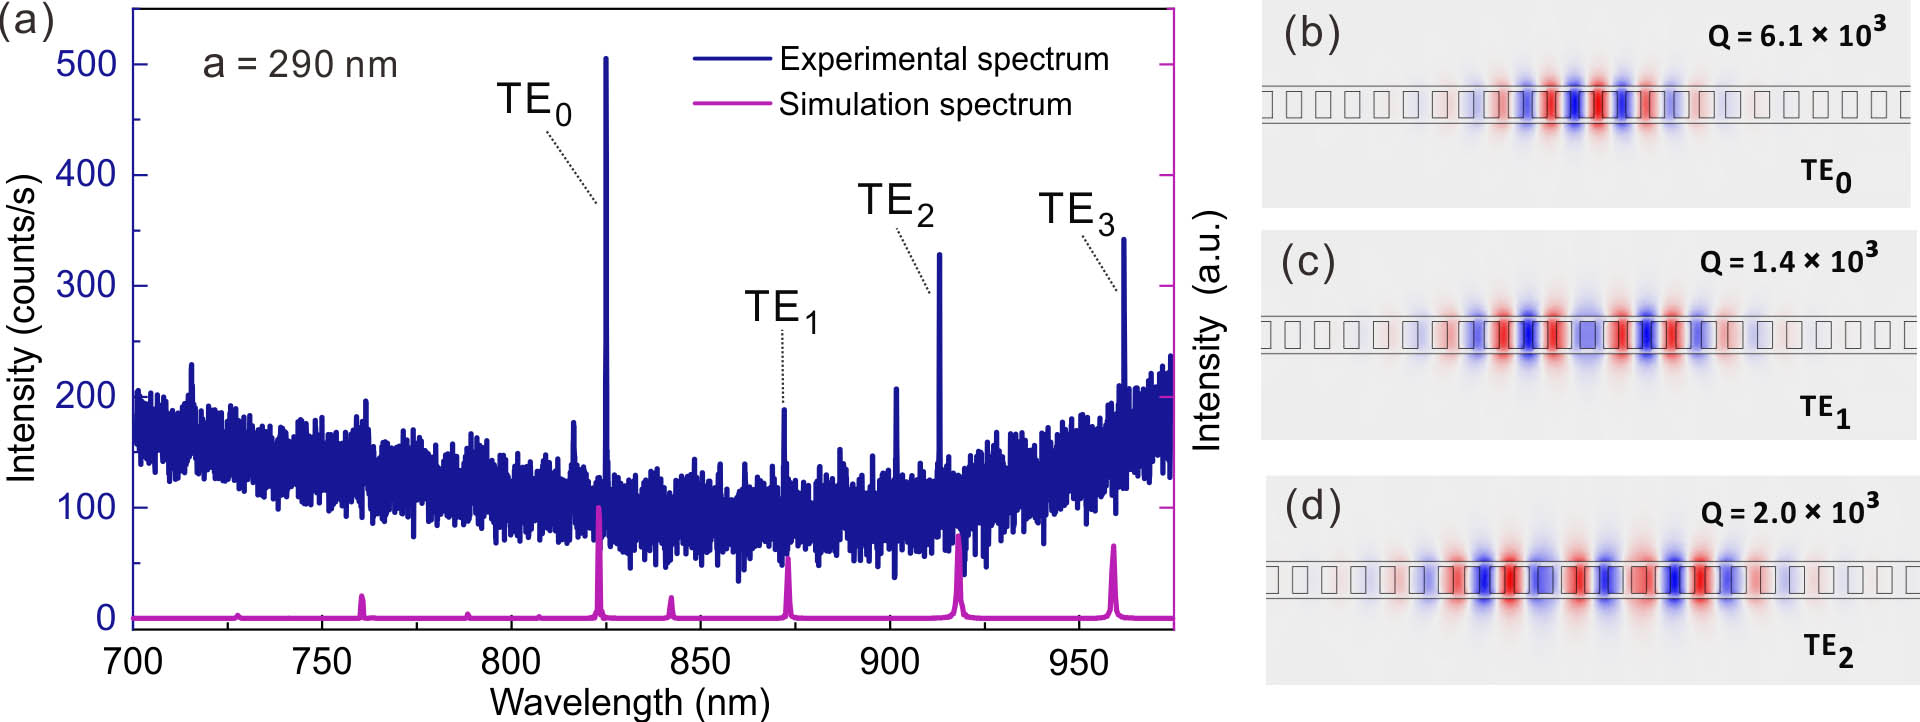 (a) Experimentally measured PL spectrum (blue line) and 3D-FDTD simulation spectrum (purple line) from a PhC with a lattice constant of 290 nm. Resonance peaks in the simulated spectrum show a good consistence with the experimental results at room temperature, especially the TE-like polarized modes. (b)–(d) 3D finite-element-method (FEM) simulated optical profiles (Ey component) of the (b) TE0, (c) TE1, and (d) TE2 modes.